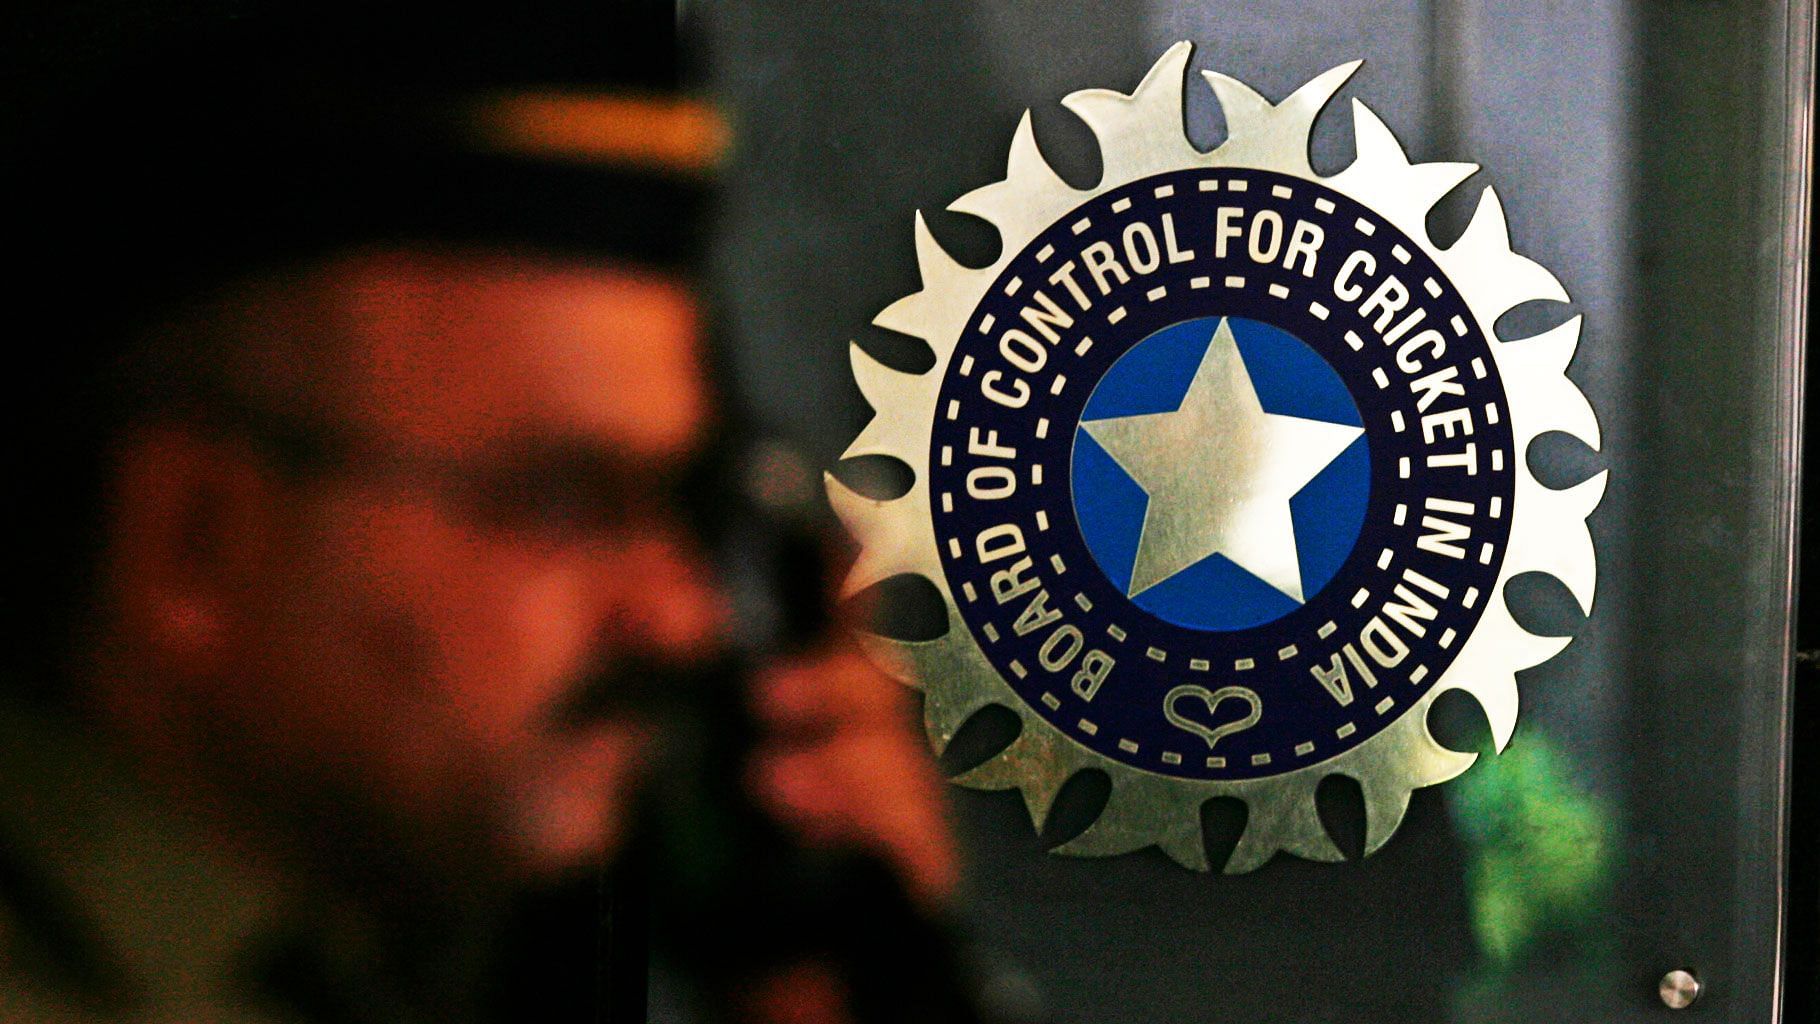 ICA will receive an initial grant from the BCCI but will have to raise money on its own in the long run.